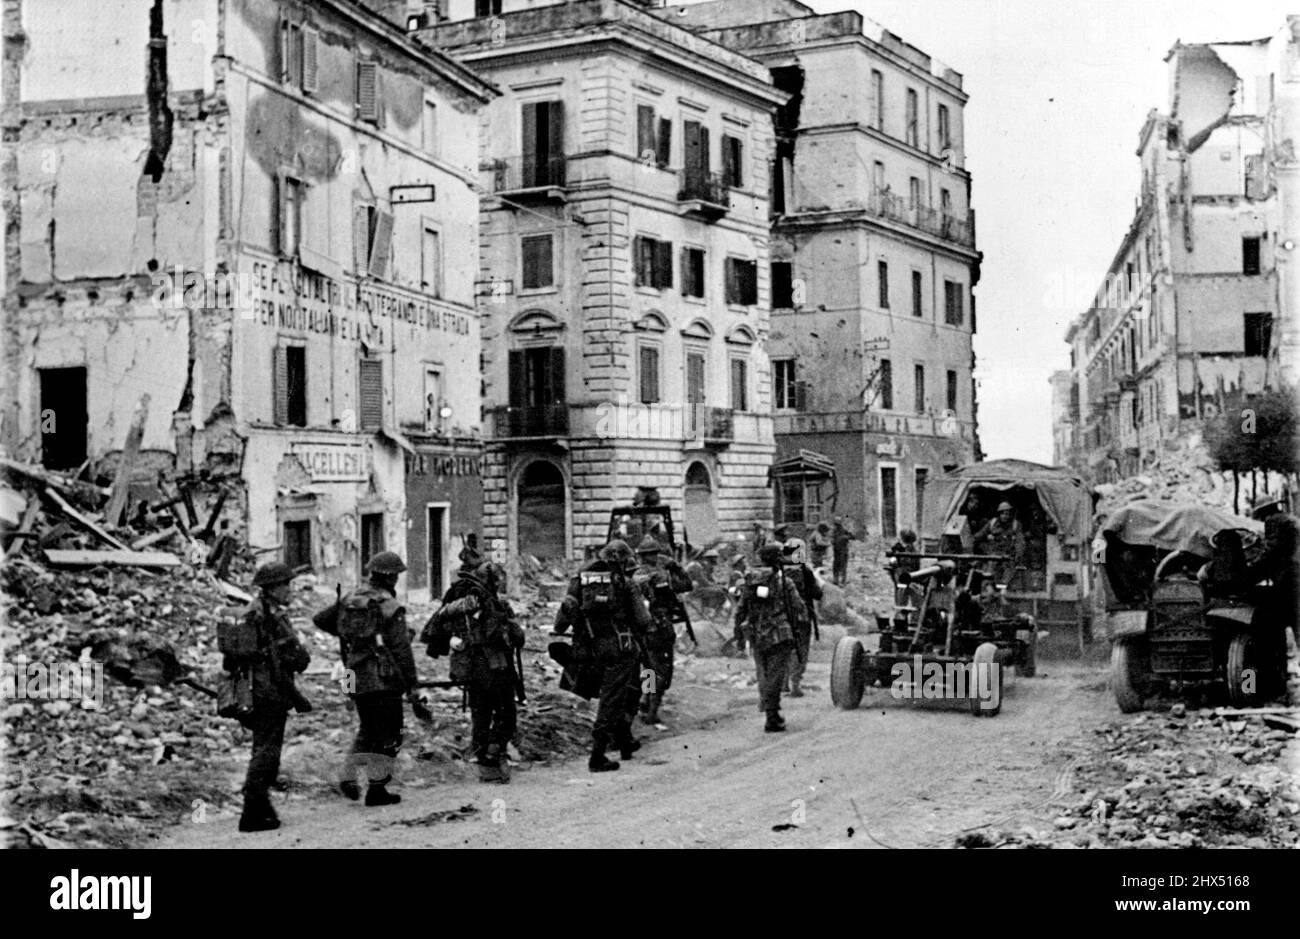 Anzio-Nettuno Landing - Since their successful landing on the coast South of Rome in the Anzio - Nettuno district Allied forces now firmly hold a bridgehead which has successfully resisted repeated German attacks in force. March 7, 1944. (Photo by British Official Photo). Stock Photo